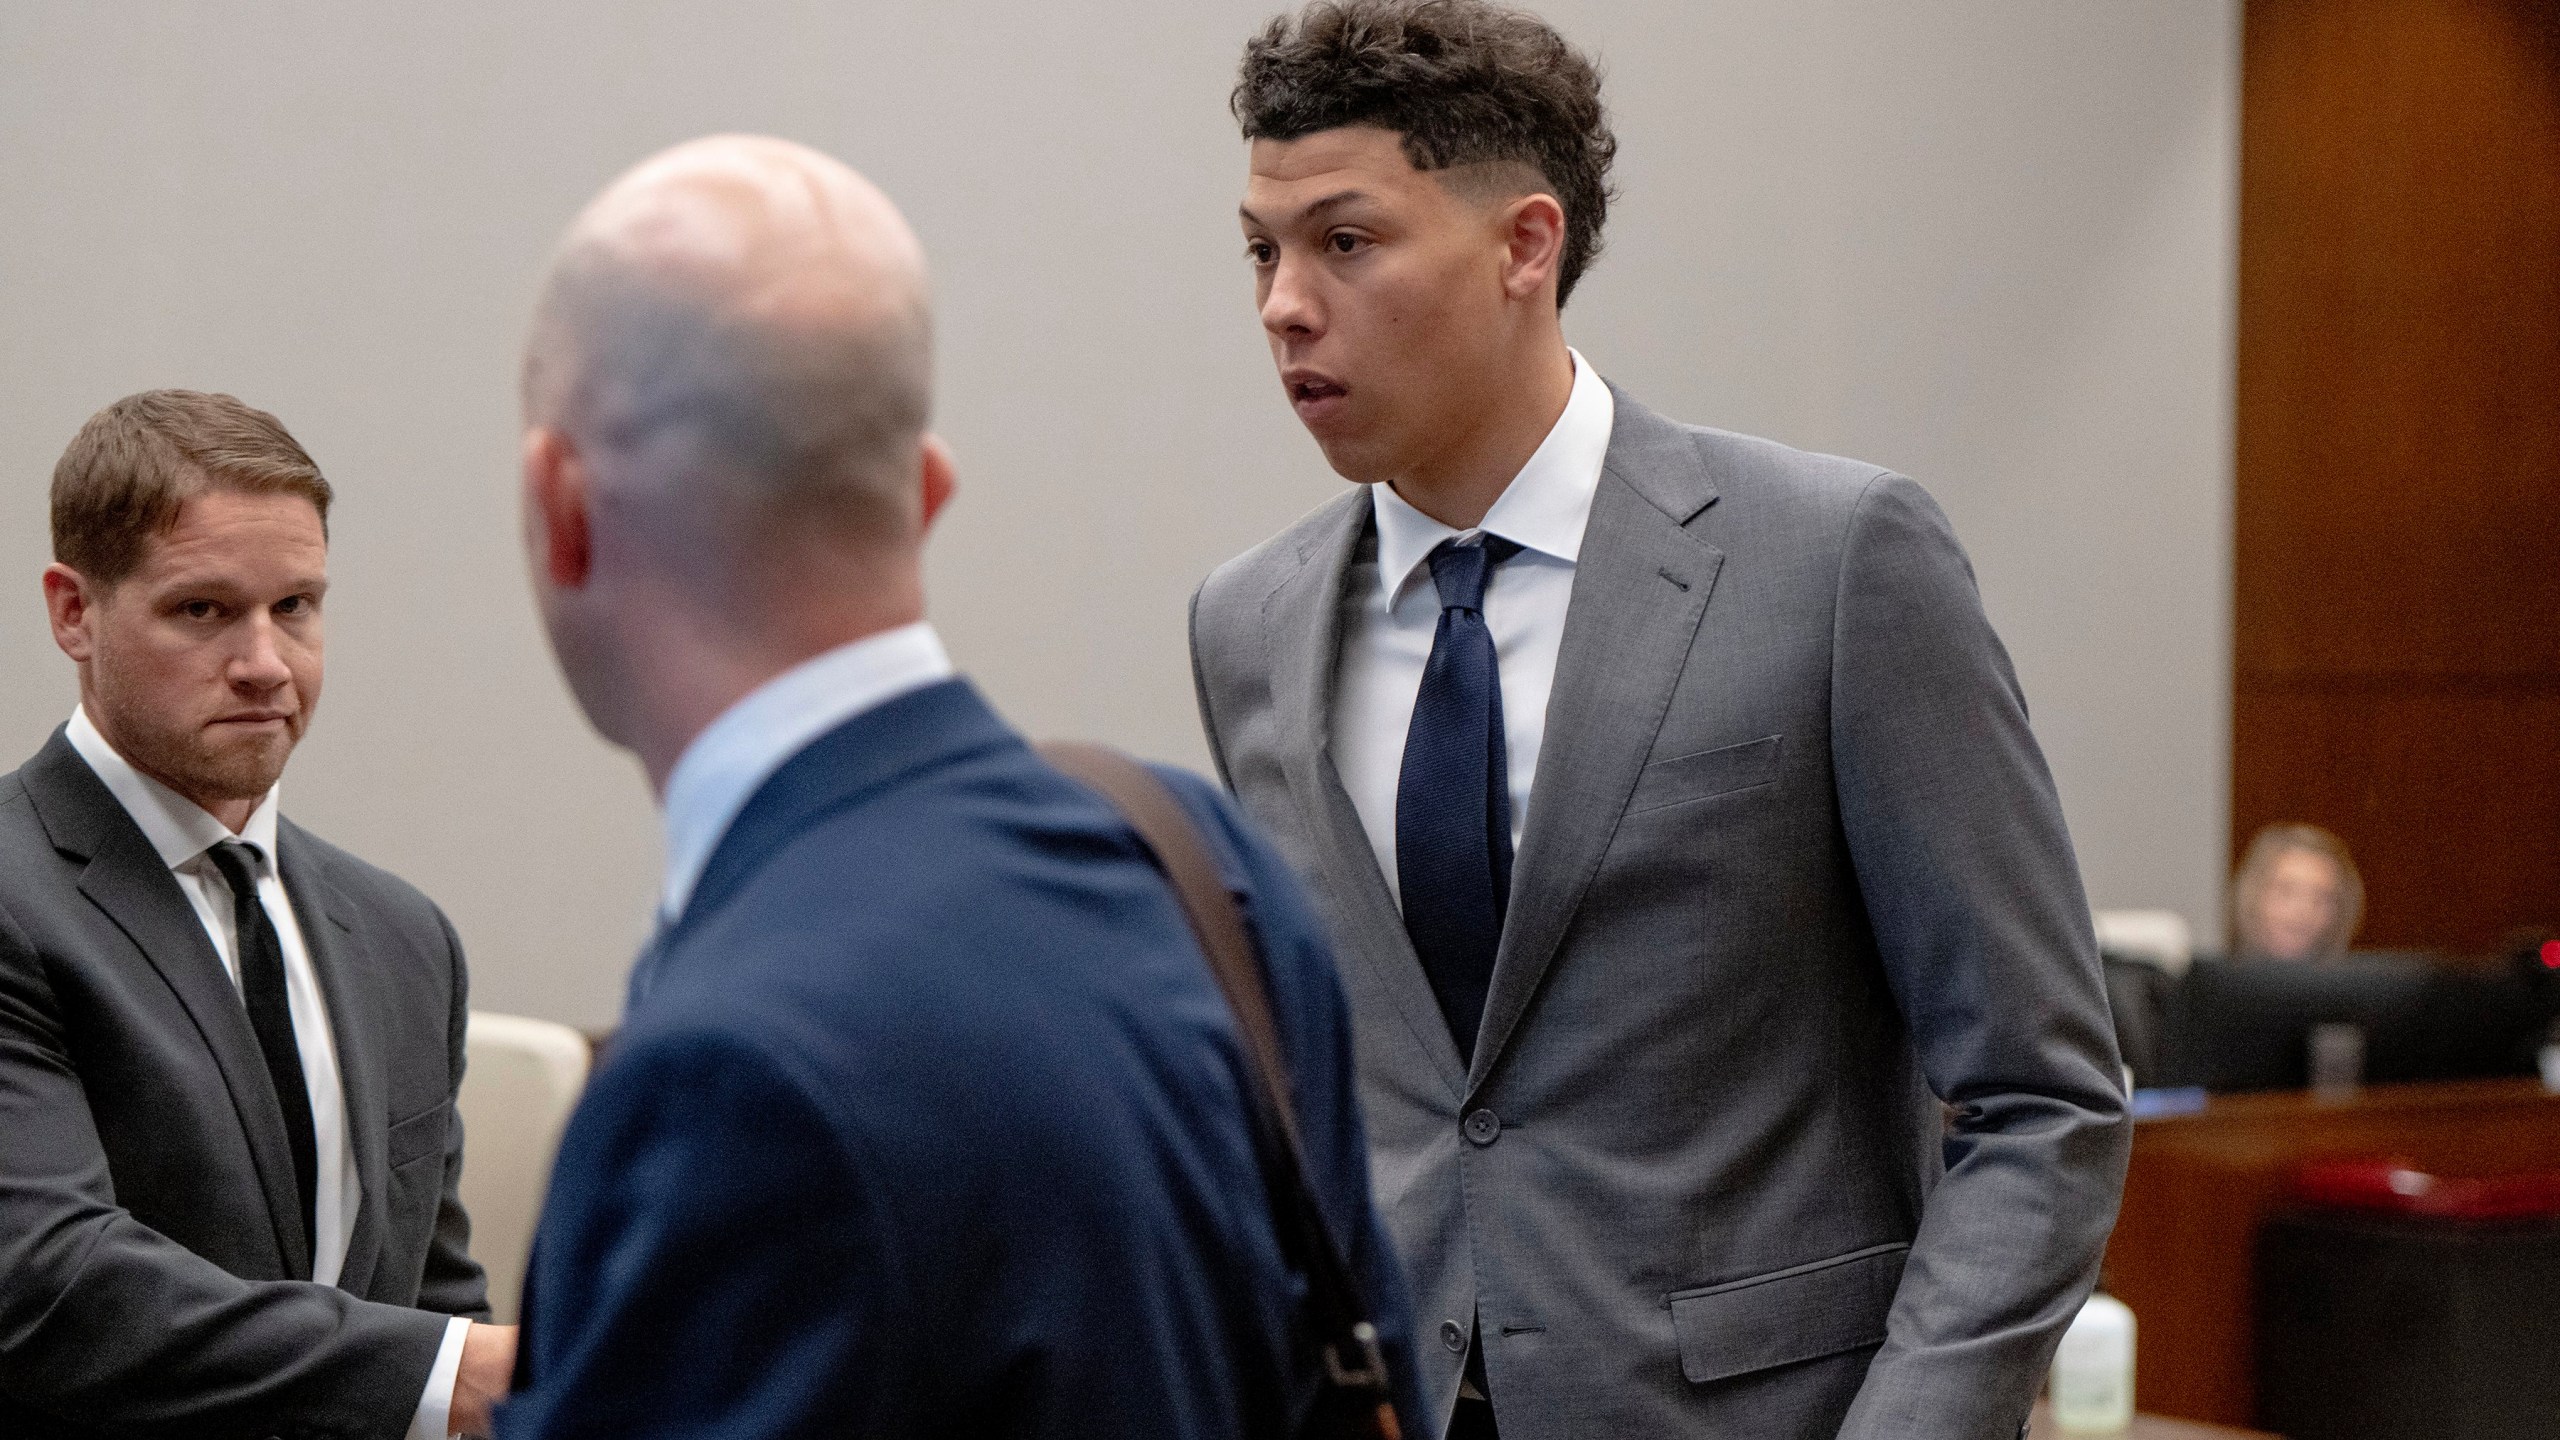 FILE - Jackson Mahomes, right, leaves the courtroom following a bond motion hearing in Johnson County District Court, May 16, 2023, in Olathe, Kan. The younger brother of Super Bowl-winning Kansas City Chiefs quarterback Patrick Mahomes has been sentenced to six months' probation in a case alleging an assault on a woman. Jackson Mahomes, 23, appeared Thursday, March 7, 2024, for his sentencing hearing via video conference and pleaded guilty to a single misdemeanor count of battery, according to online court records. (Nick Wagner/The Kansas City Star via AP, File)